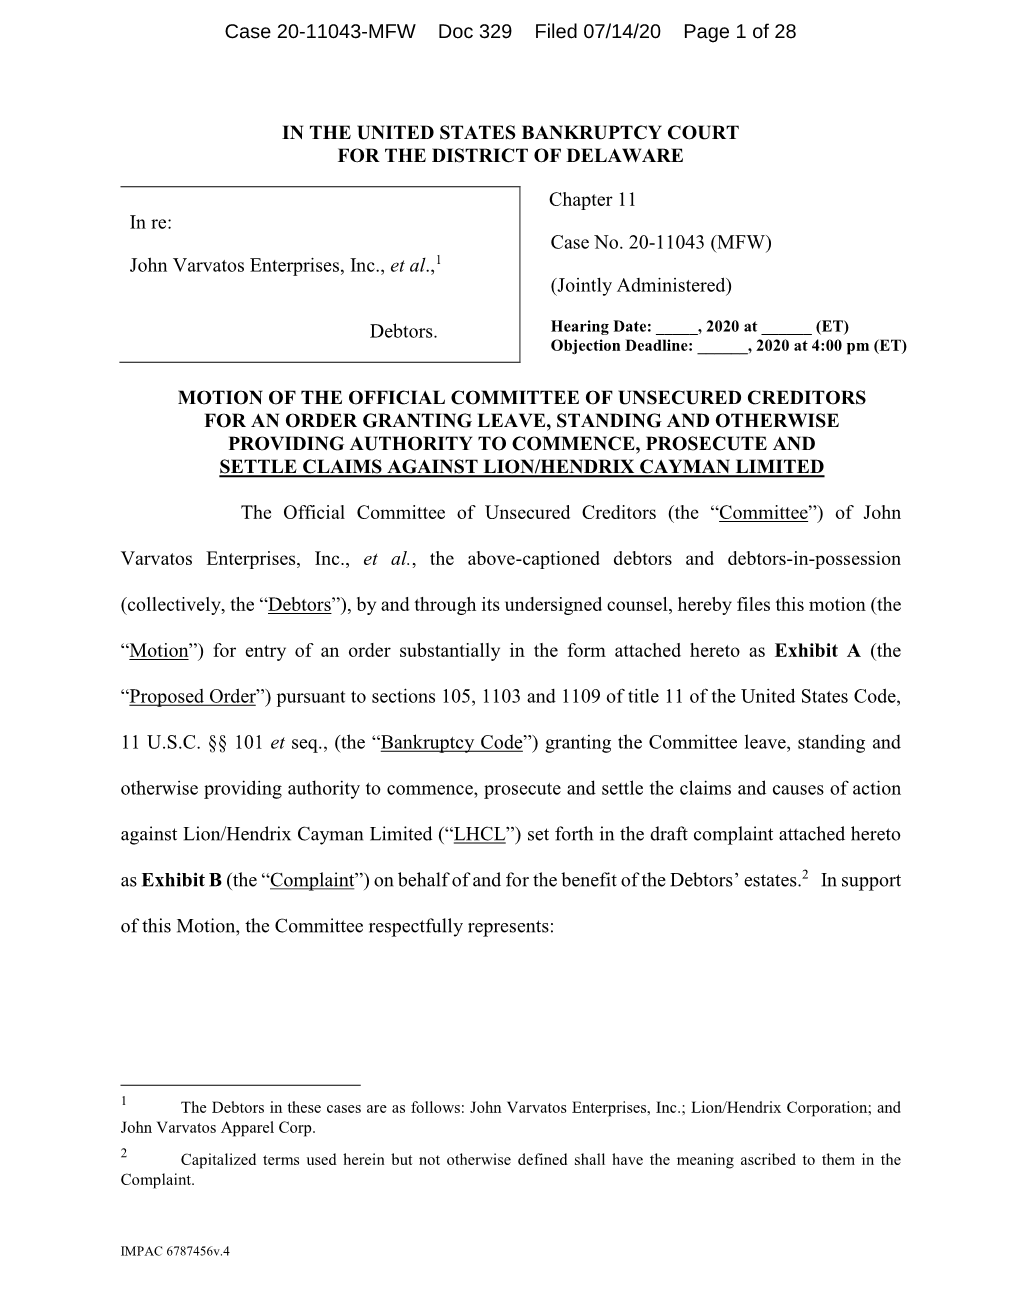 Case 20-11043-MFW Doc 329 Filed 07/14/20 Page 1 of 28